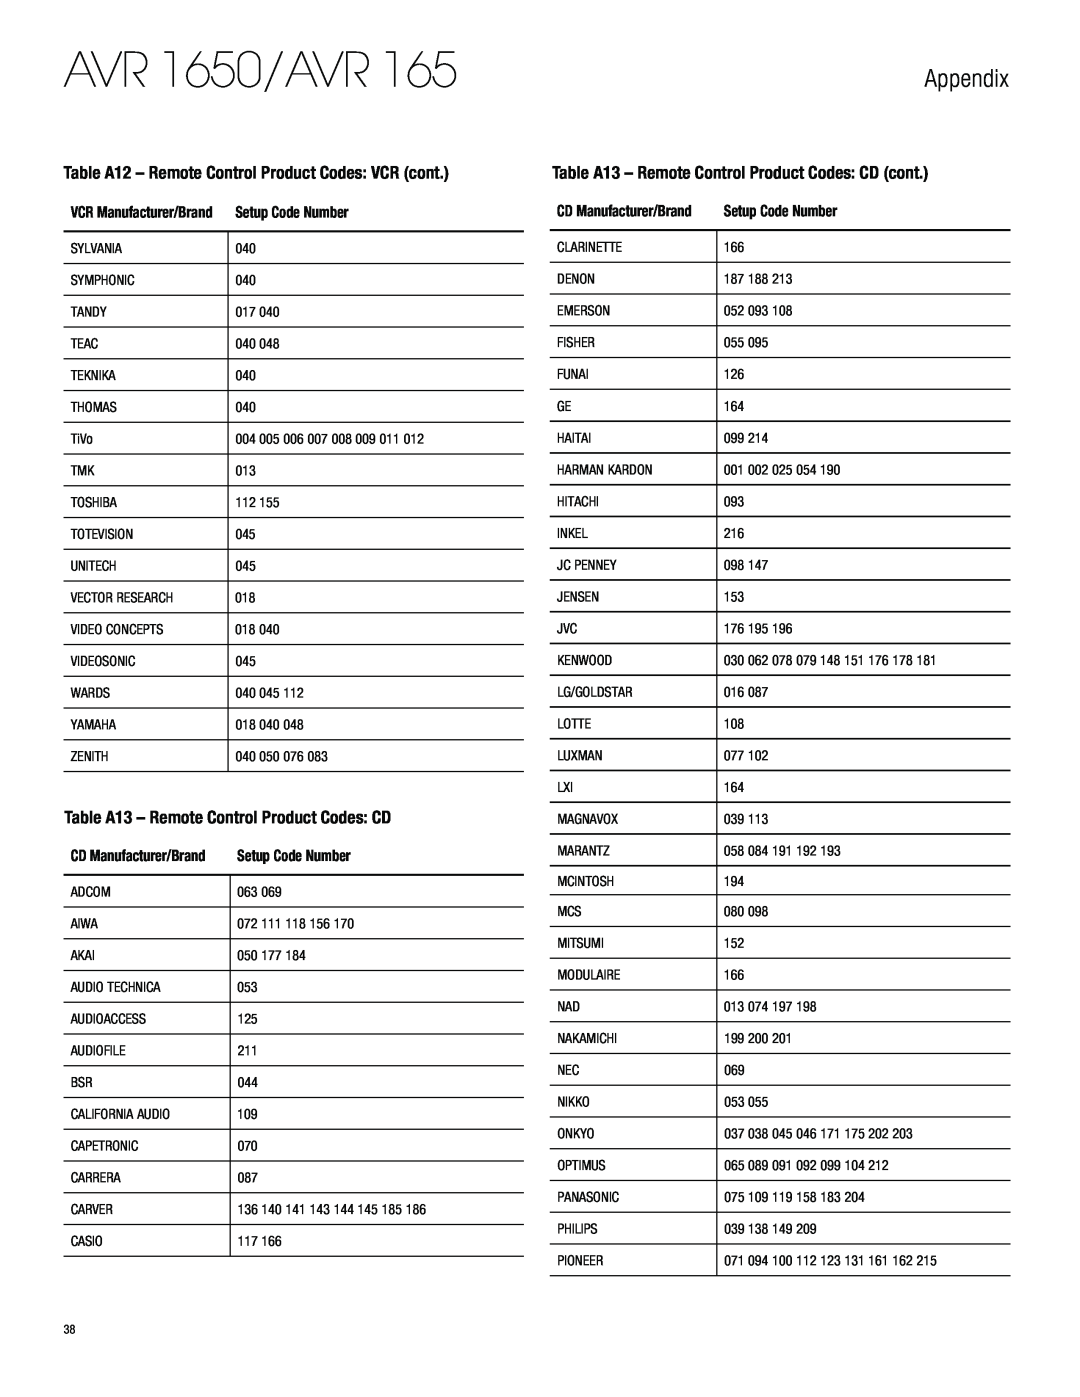 Harman-Kardon owner manual Table A13 – Remote Control Product Codes: CD, AVR 1650/AVR, Appendix 